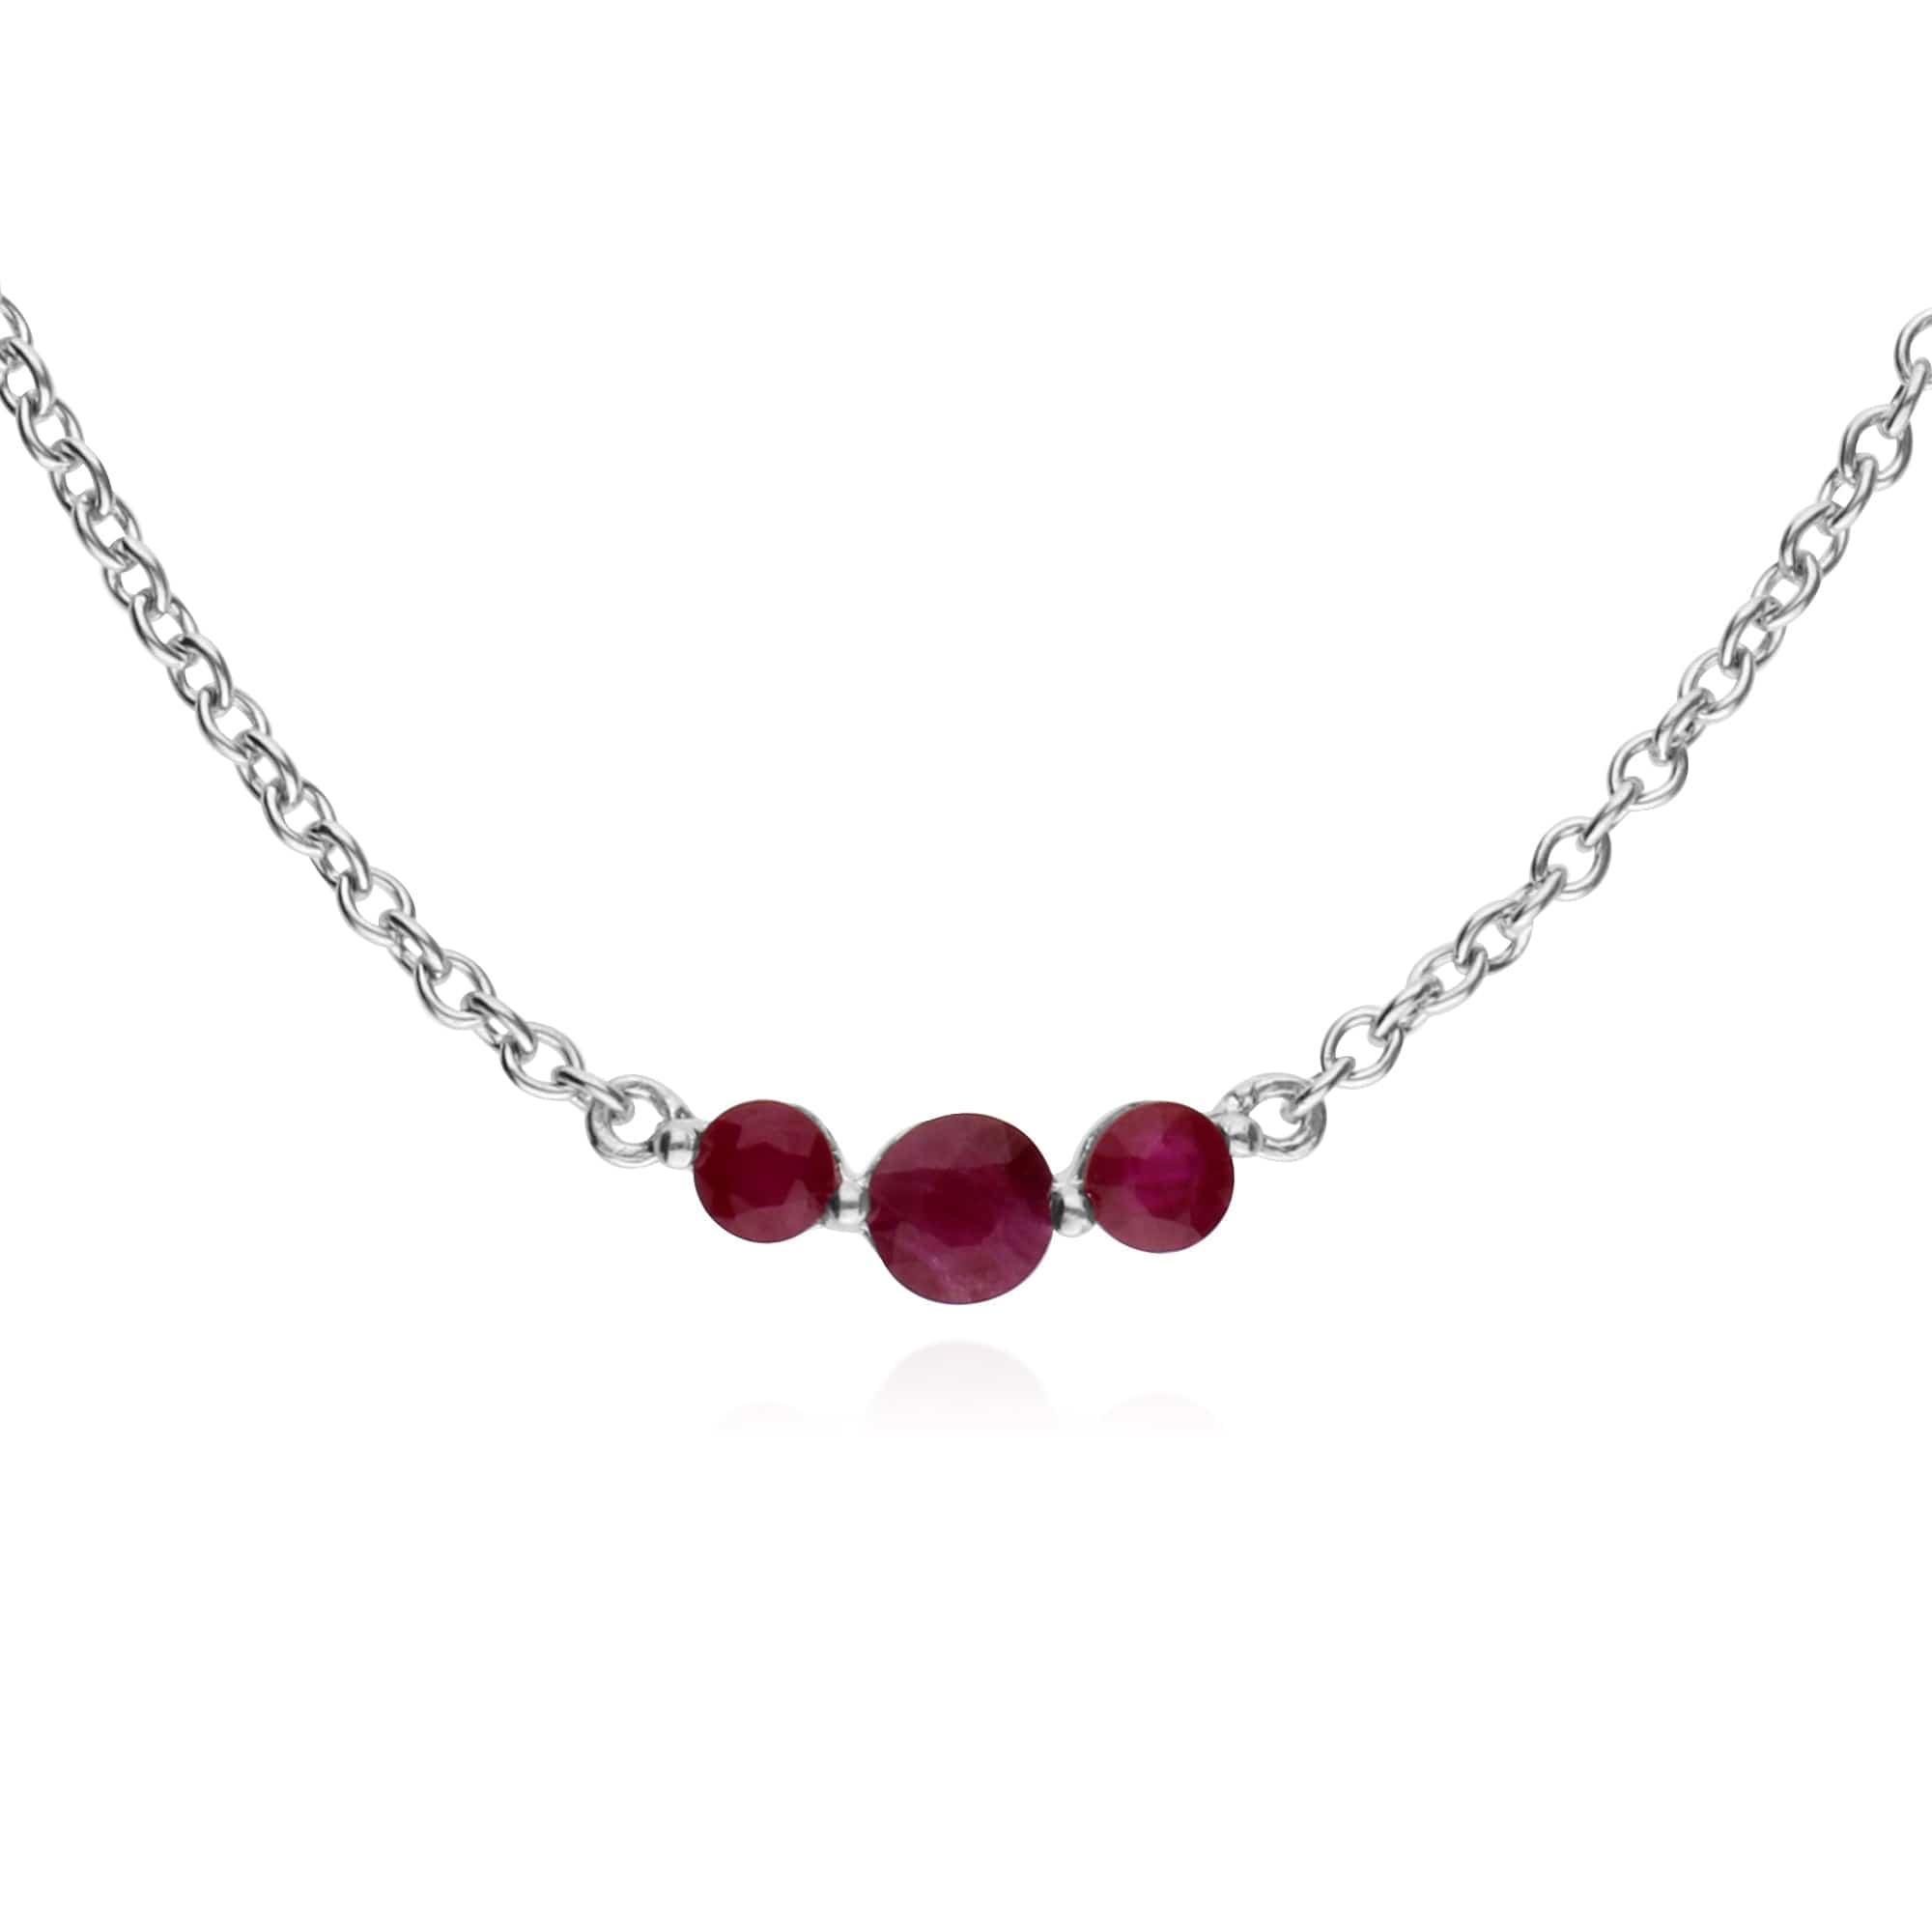 270E025505925-270N034205925 Classic Round Ruby Three Stone Gradient Earrings & Necklace Set in 925 Sterling Silver 3